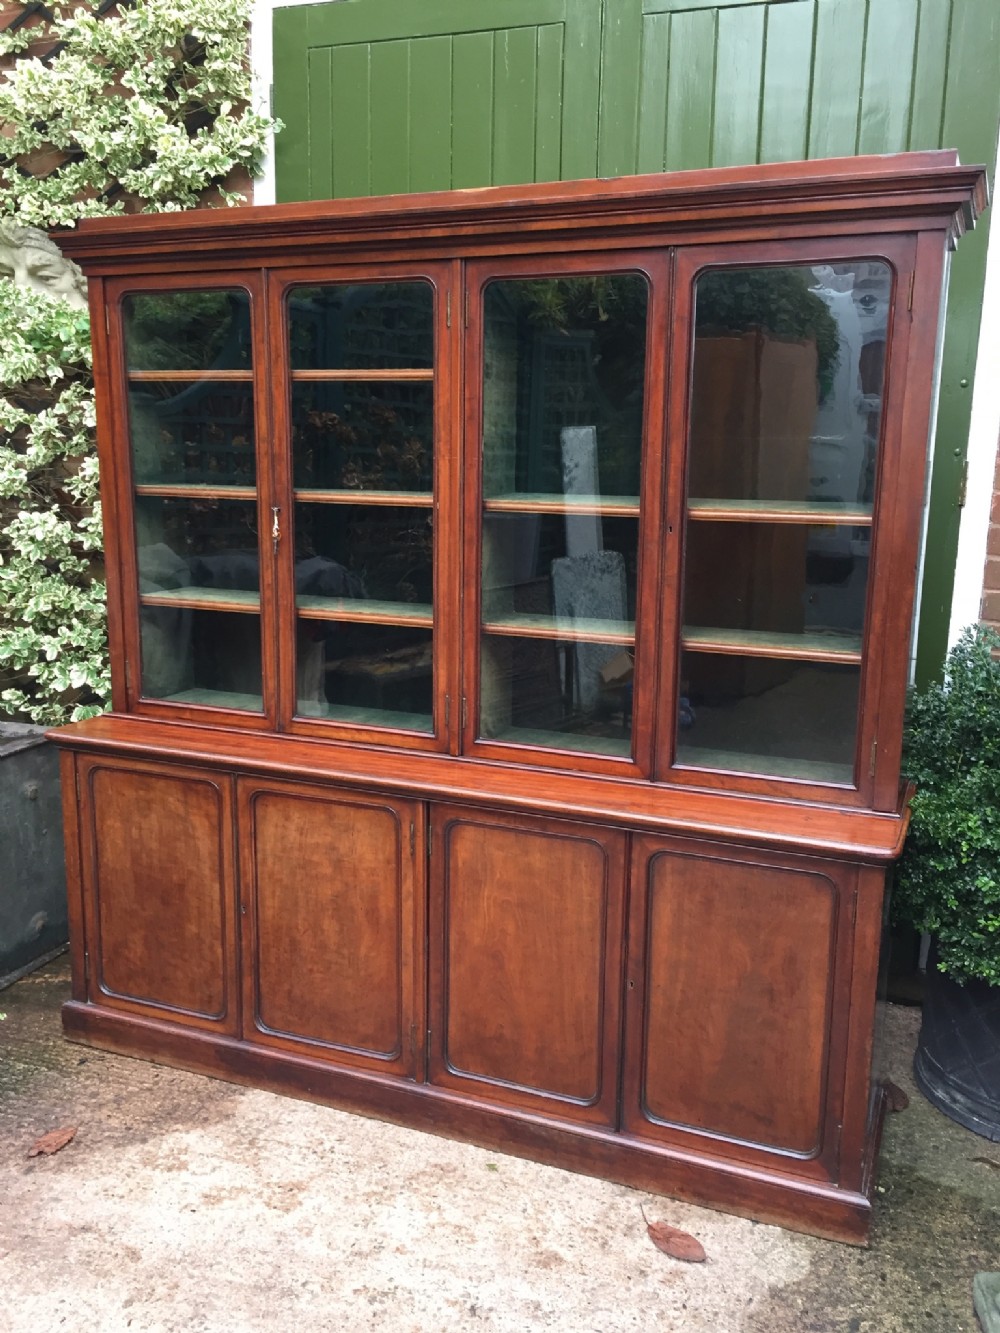 fine quality early c19th mahogany 4door library bookcase cabinet of elegant and compact proportions